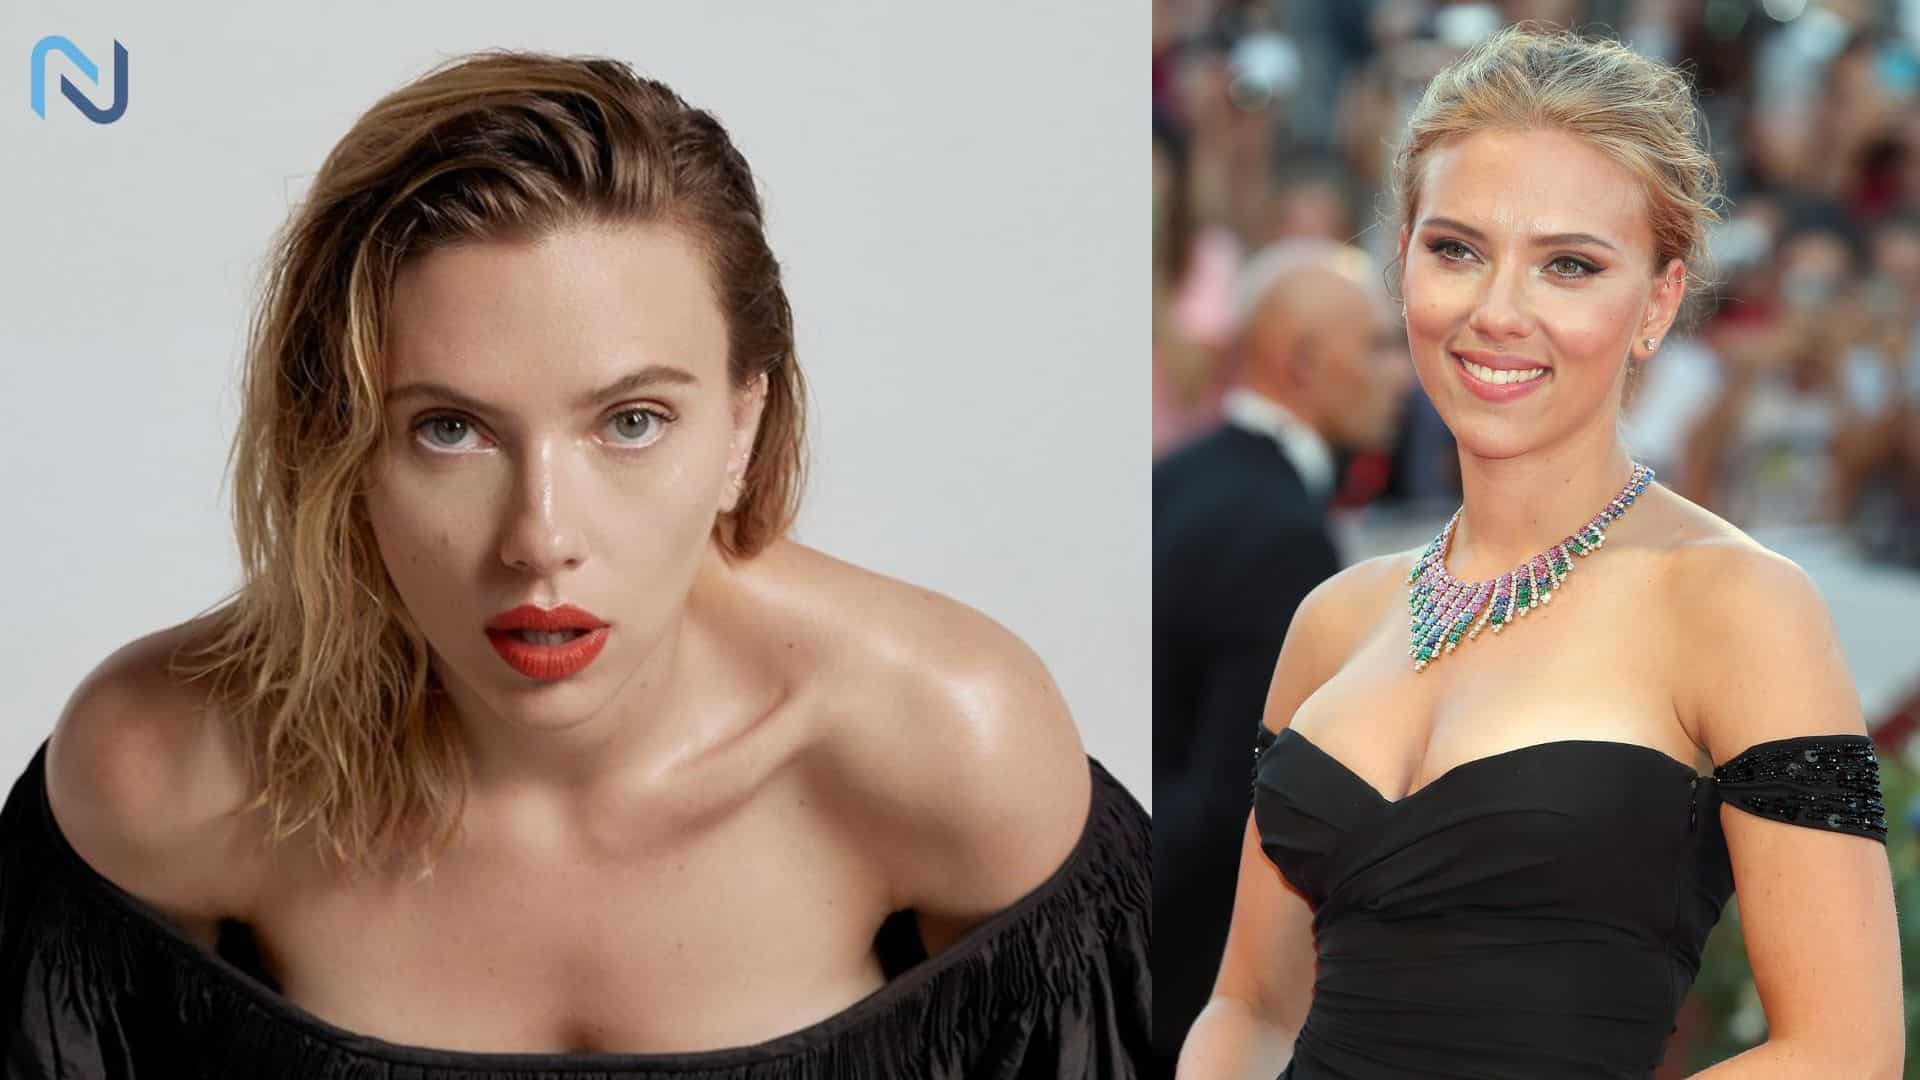 Scarlett Johansson Hottest and Most Beautiful American Actress